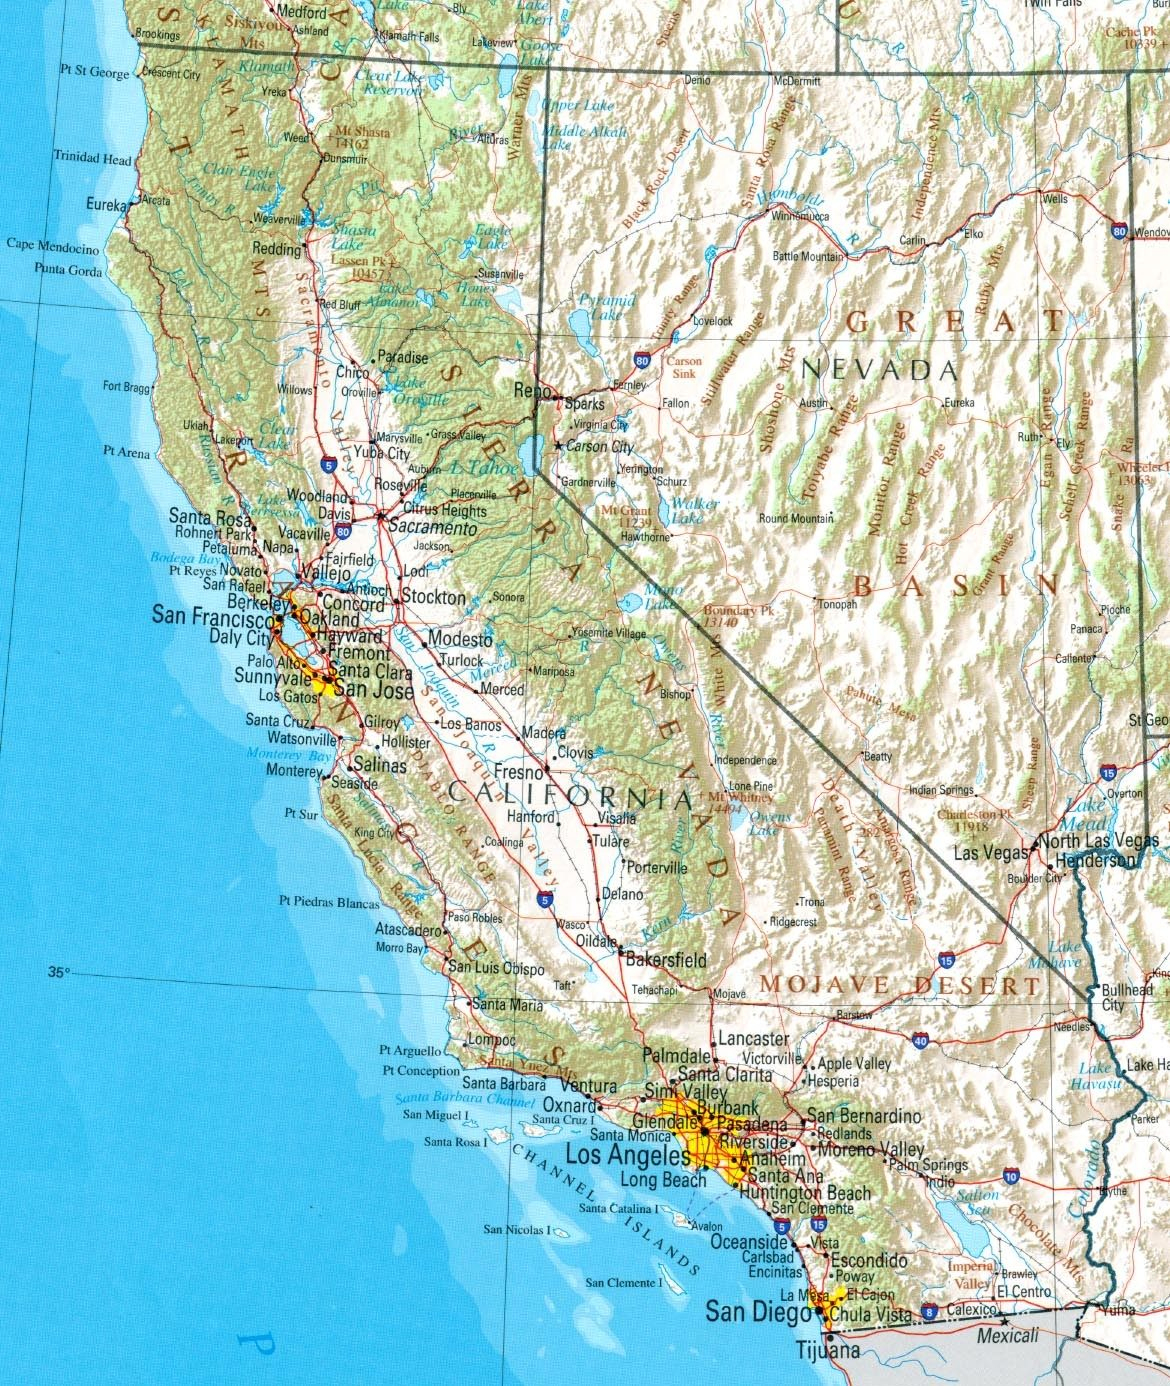 Topographical Map Of California | D1Softball - Topo Map Of California